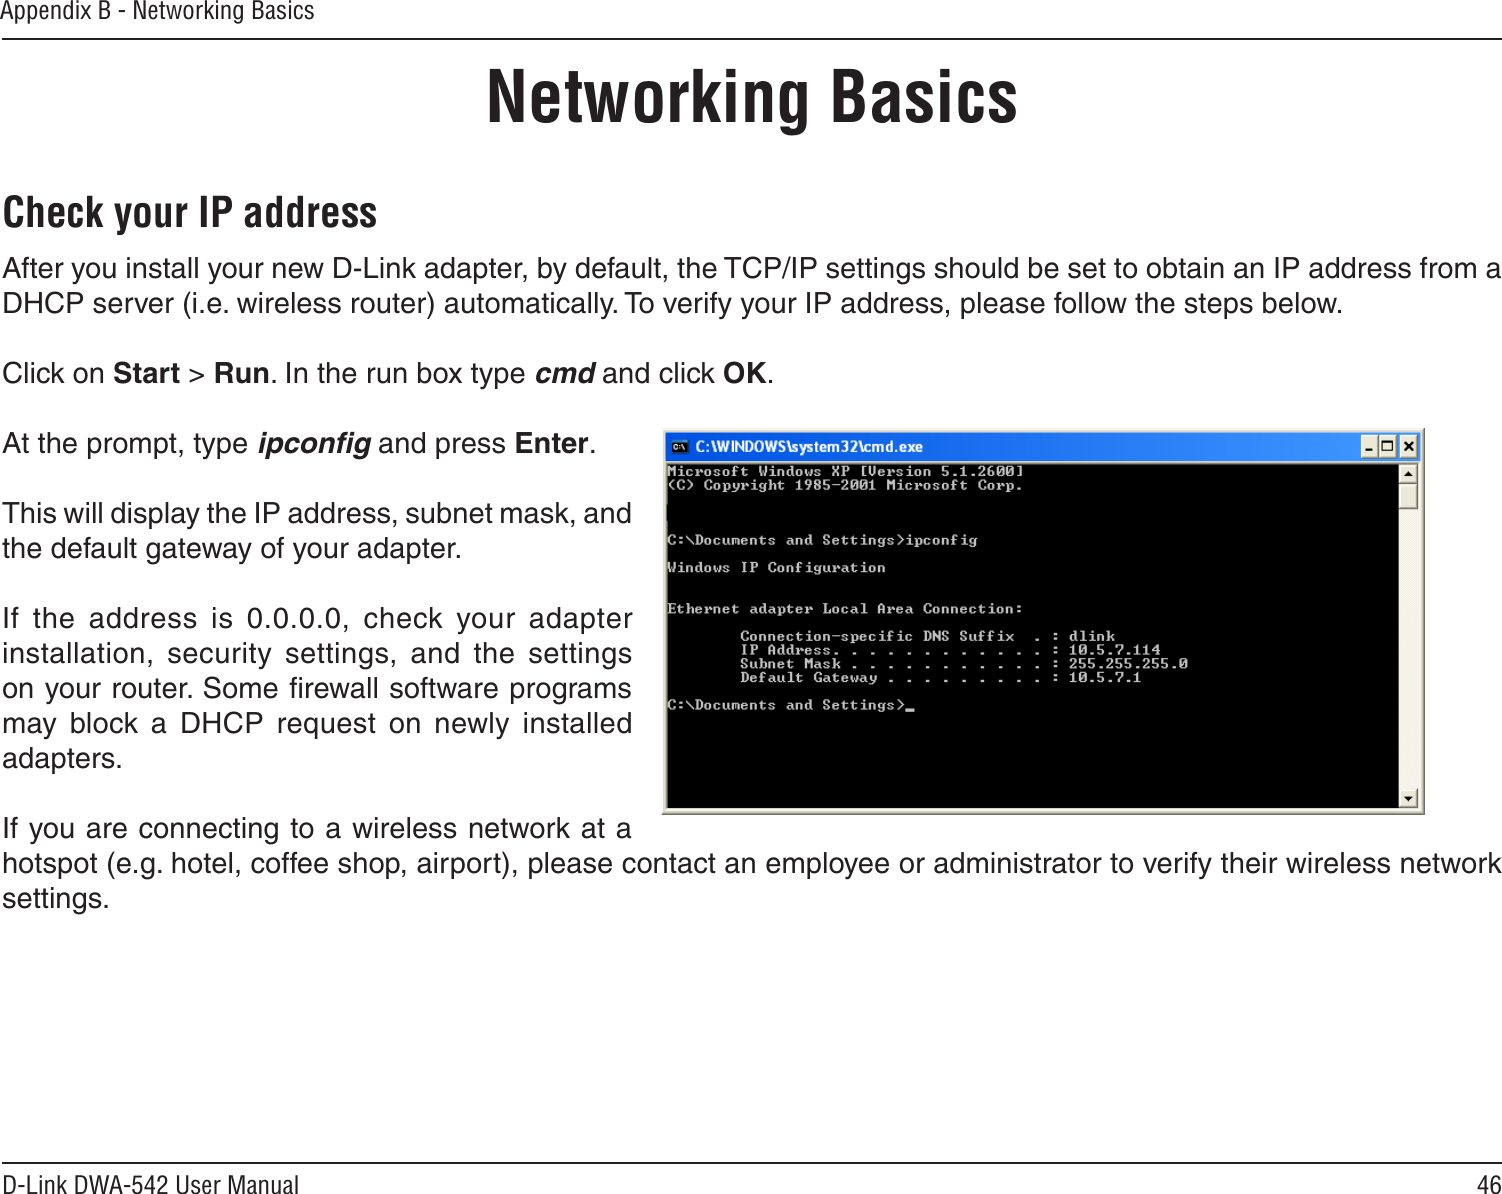 46D-Link DWA-542 User ManualAppendix B - Networking BasicsNetworking BasicsCheck your IP addressAfter you install your new D-Link adapter, by default, the TCP/IP settings should be set to obtain an IP address from a DHCP server (i.e. wireless router) automatically. To verify your IP address, please follow the steps below.Click on Start &gt; Run. In the run box type cmd and click OK.At the prompt, type ipconﬁg and press Enter.This will display the IP address, subnet mask, and the default gateway of your adapter.If  the  address  is  0.0.0.0,  check  your  adapter installation,  security  settings,  and  the  settings on your router. Some ﬁrewall software programs may  block  a  DHCP  request  on  newly  installed adapters. If you are connecting to a wireless network at a hotspot (e.g. hotel, coffee shop, airport), please contact an employee or administrator to verify their wireless network settings.